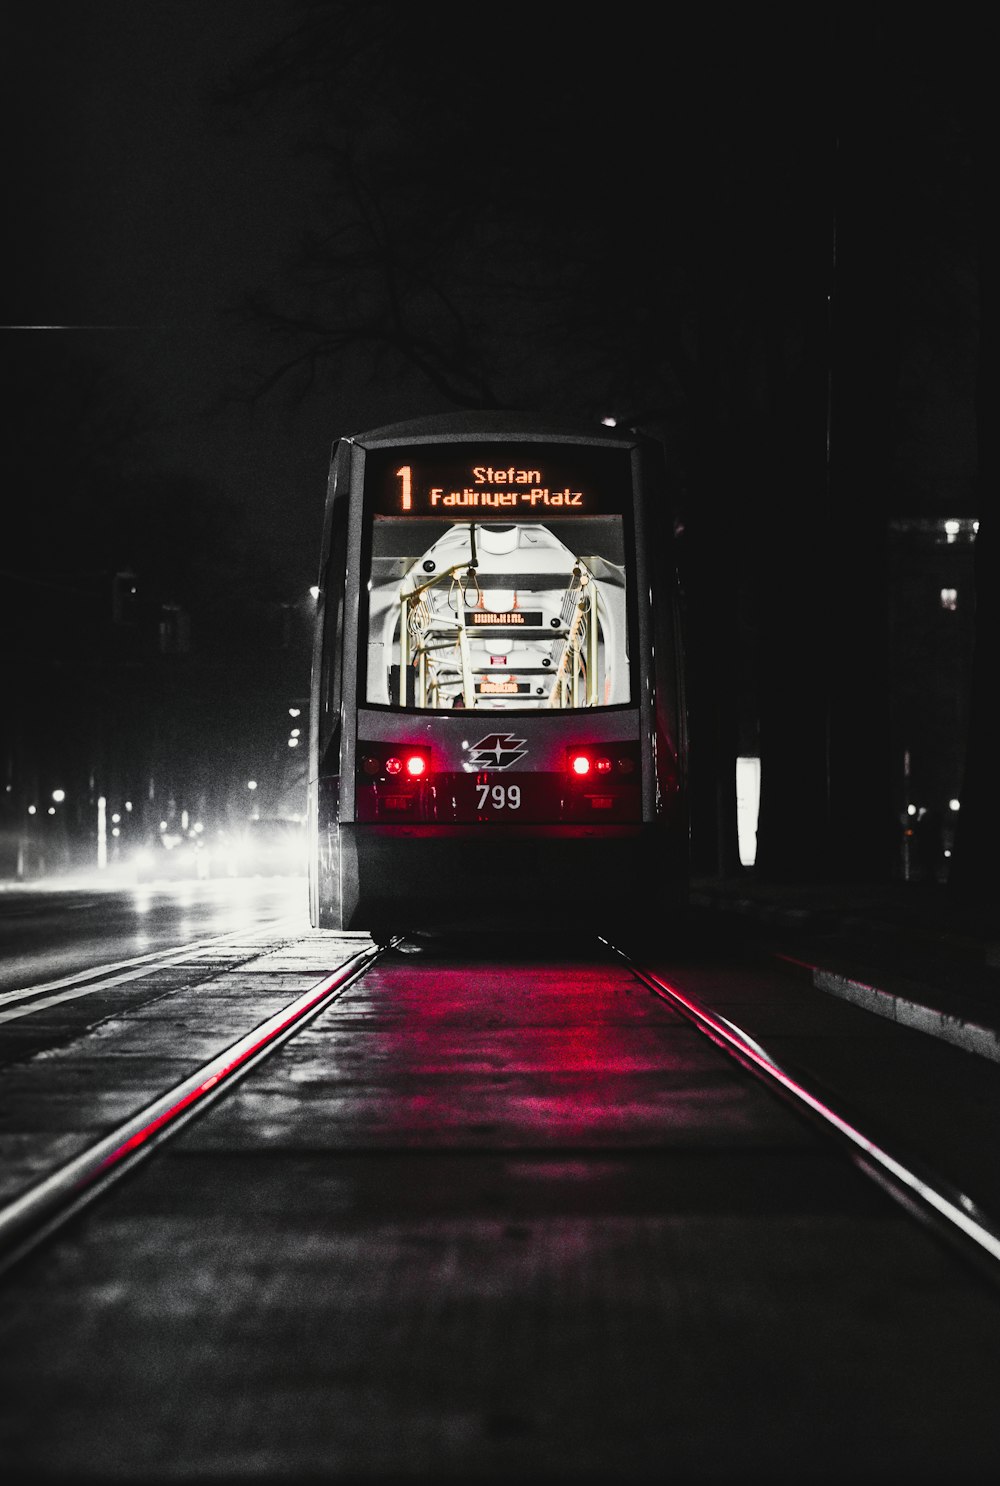 red and white bus on road during nighttime